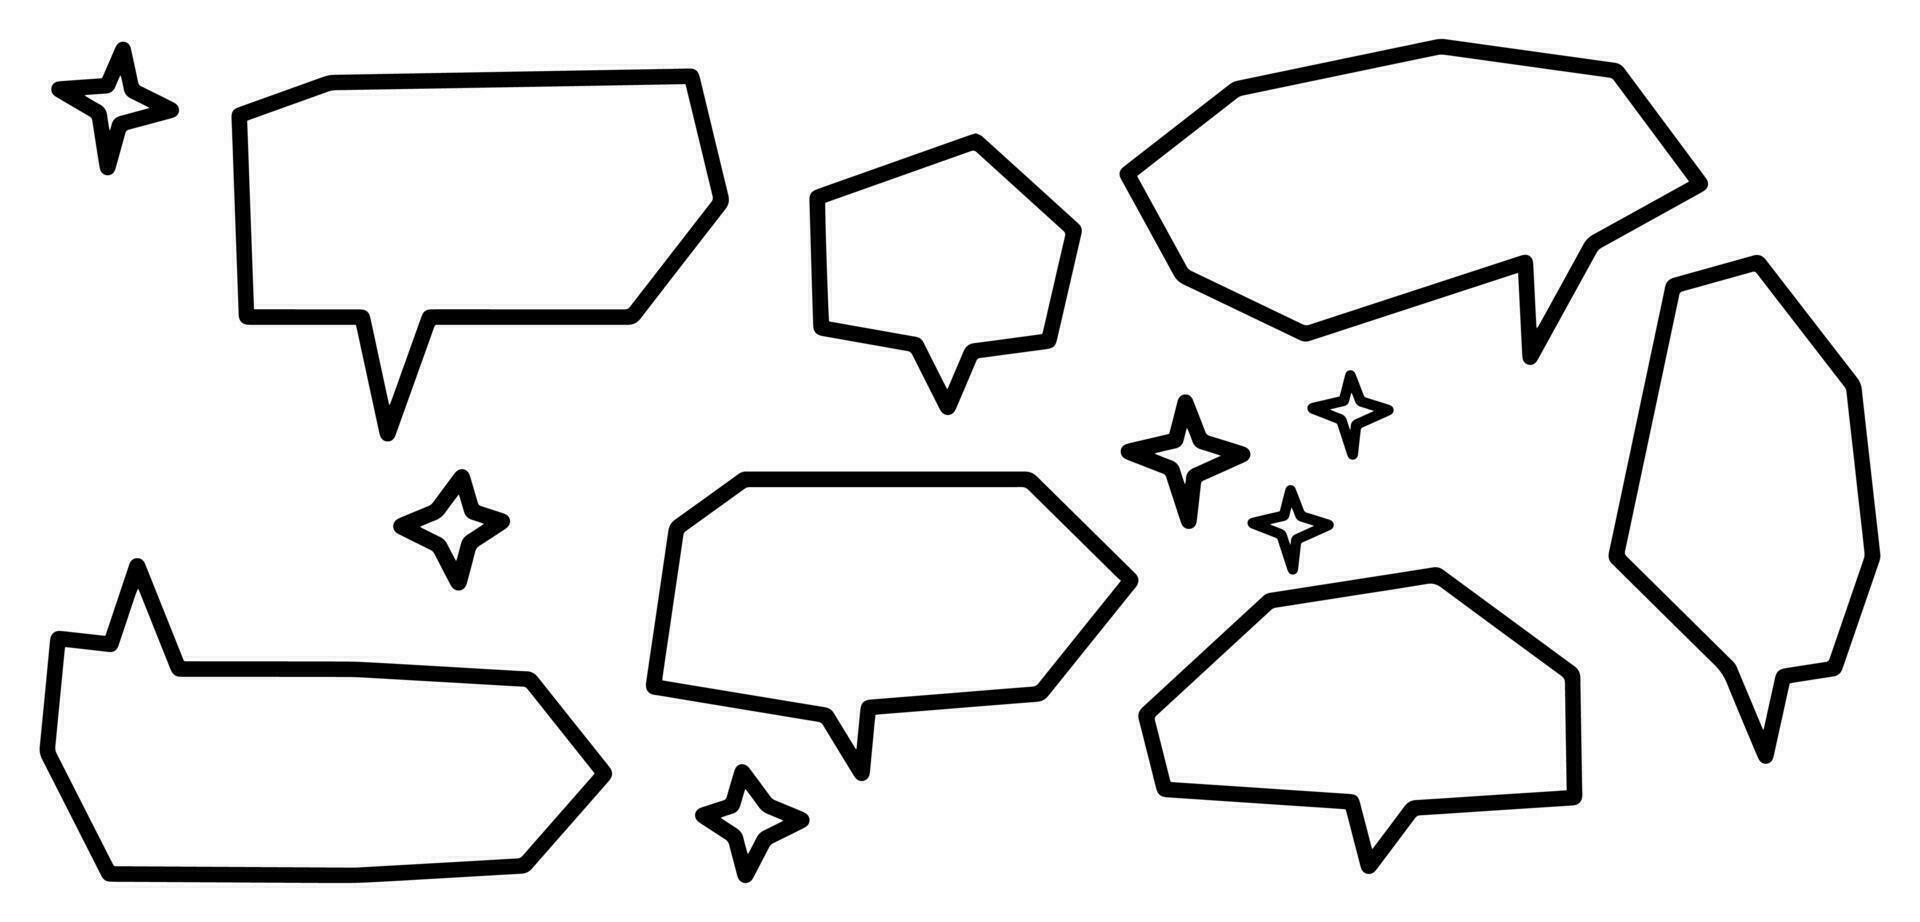 Doodle speech bubbles with sparkle on set. hand drawn style. isolated on white background. vector illustration